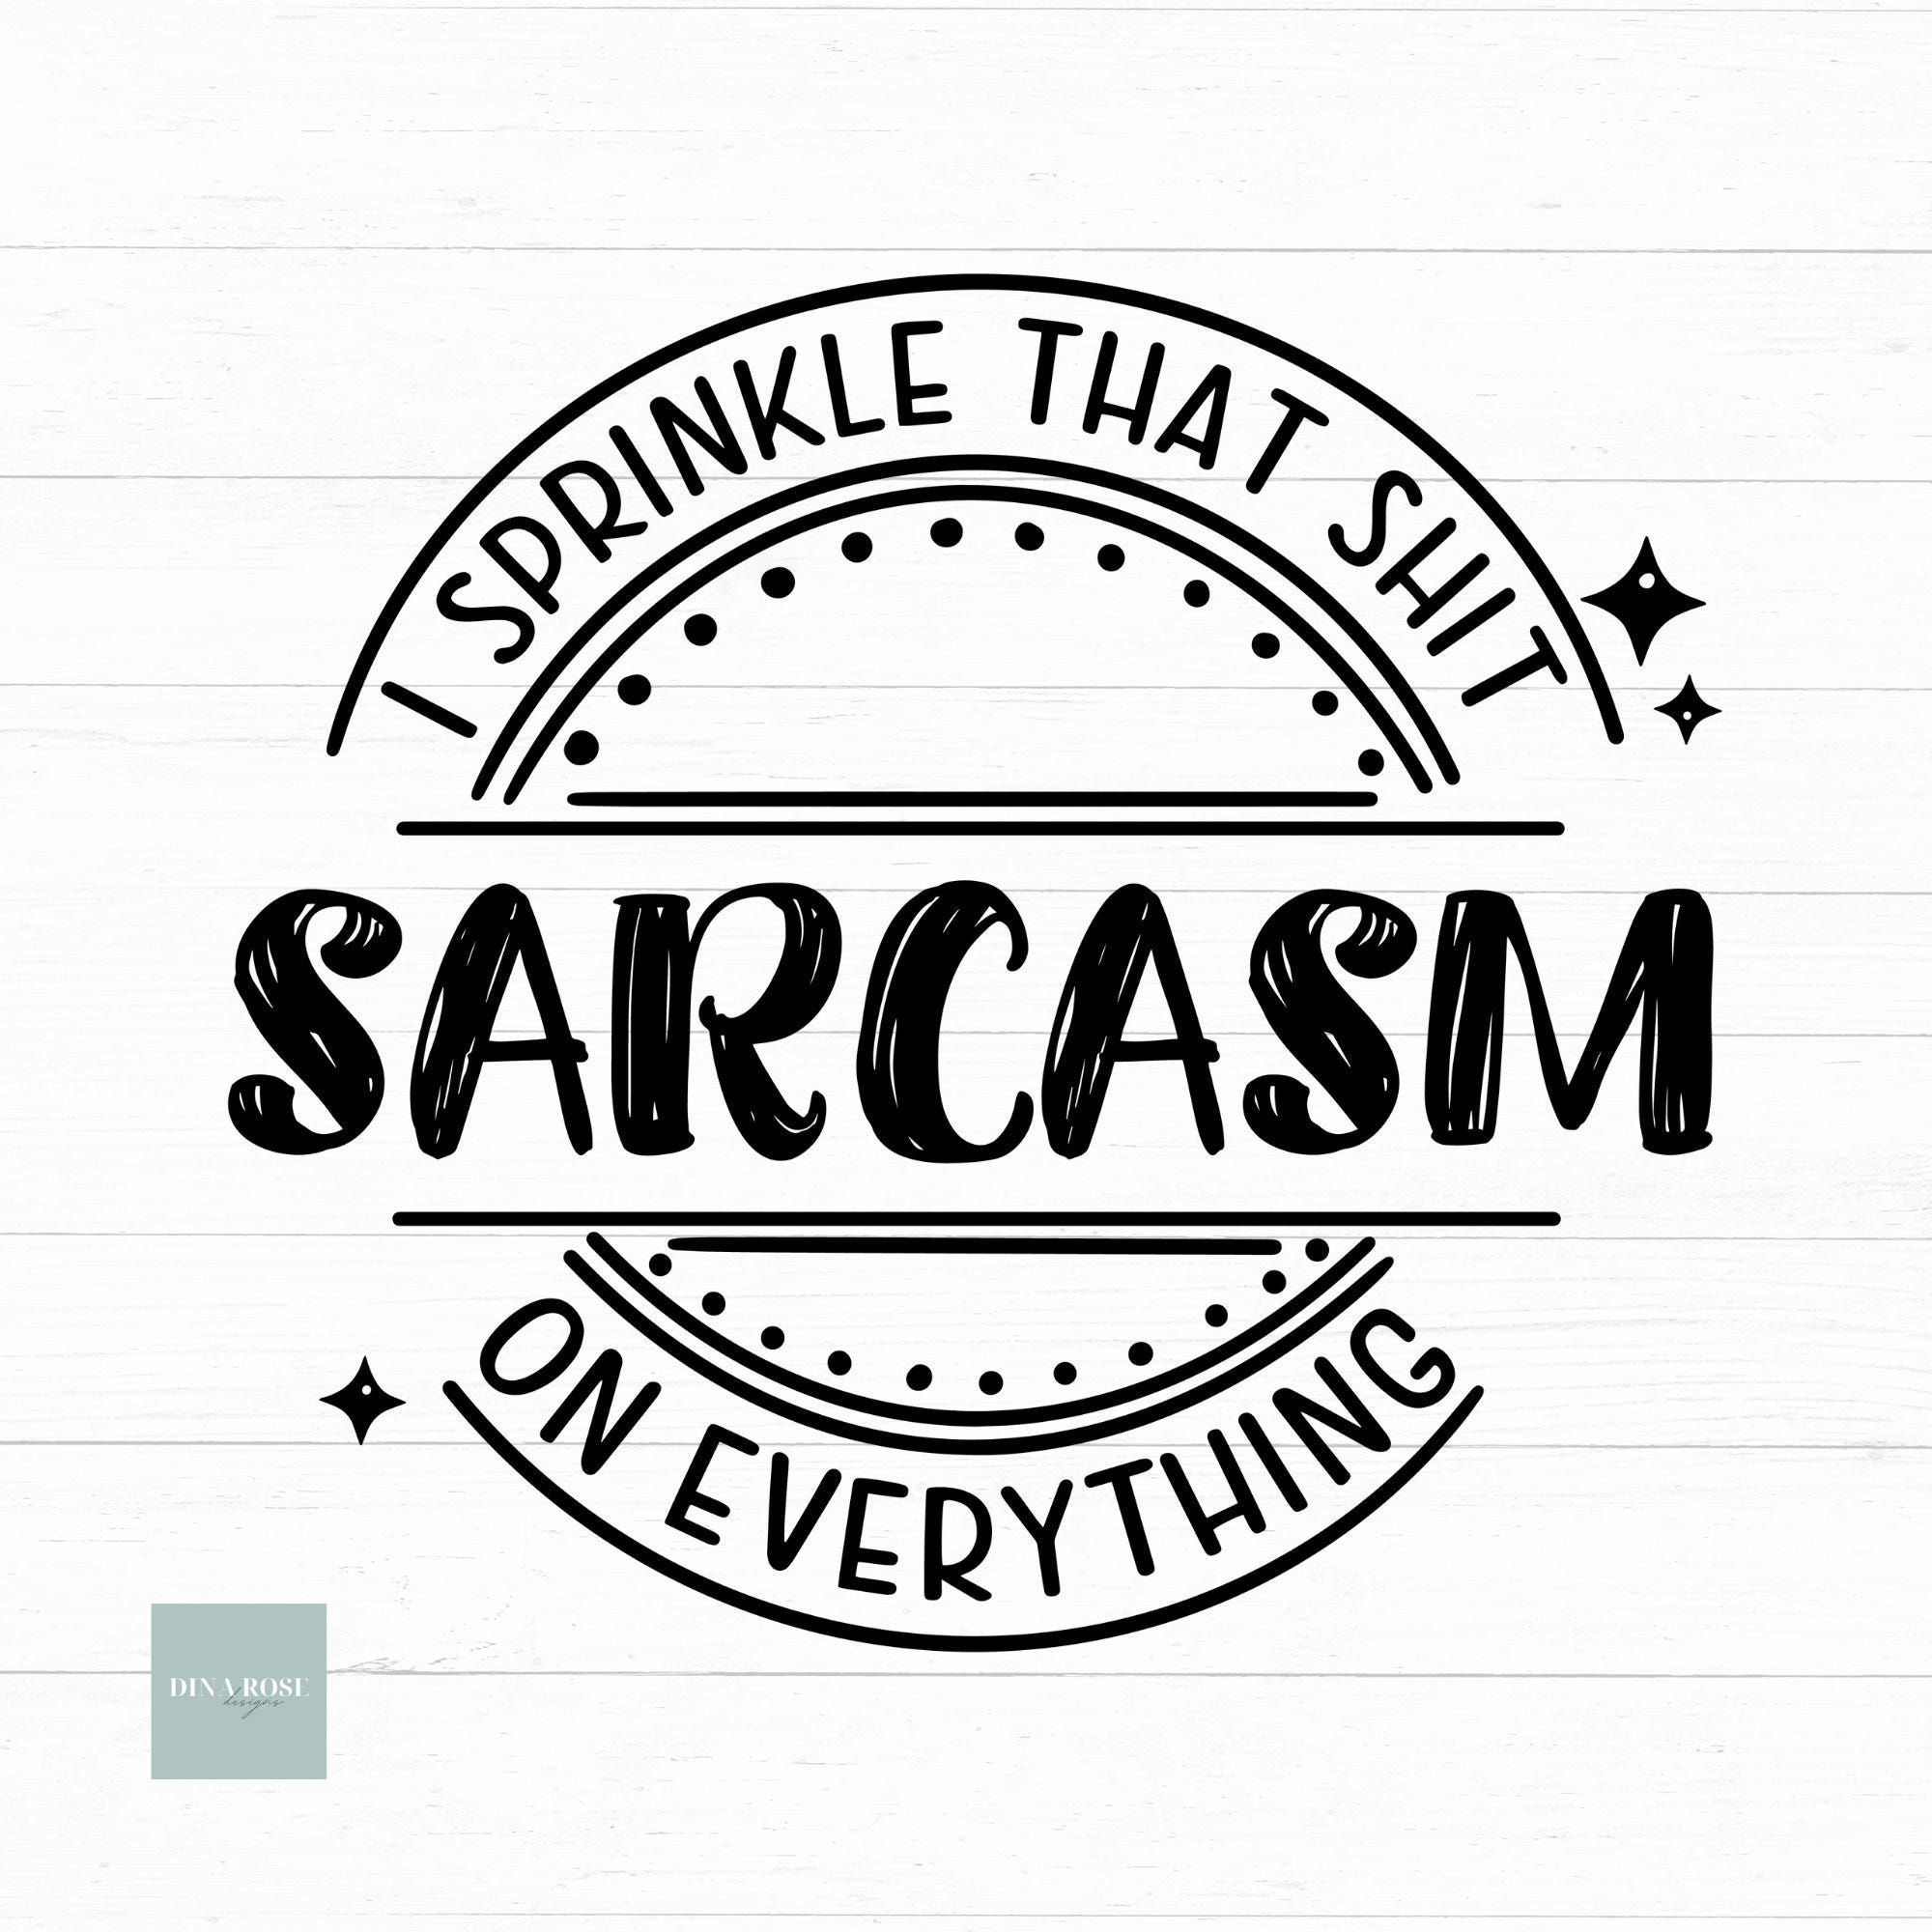 Sarcasm Svg, Sarcastic Svg, Funny Quote Svg, Sassy Svg, Sarcasm I Sprinkle That Shit On Everything, Png Cut File, Clipart, File For Cricut